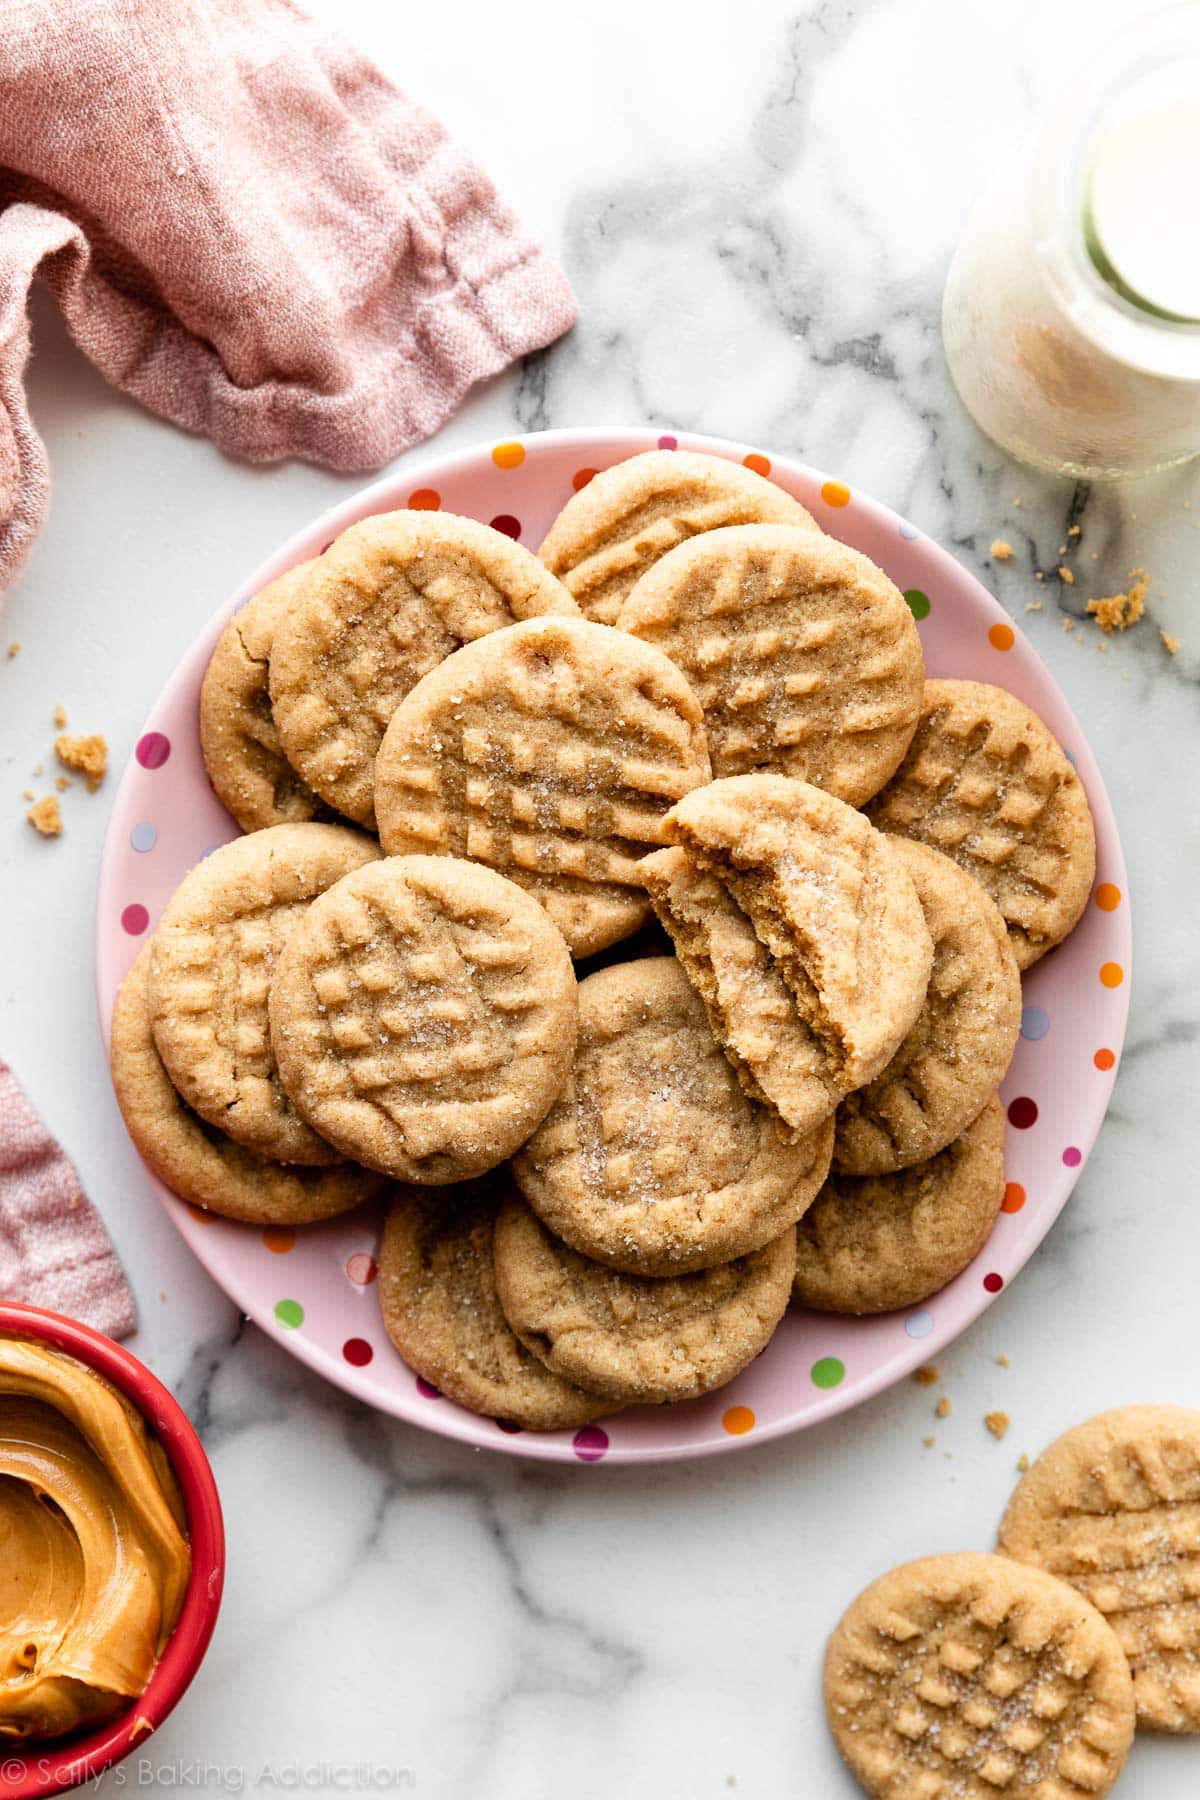 Peanut butter cookies on a pink dotted plate